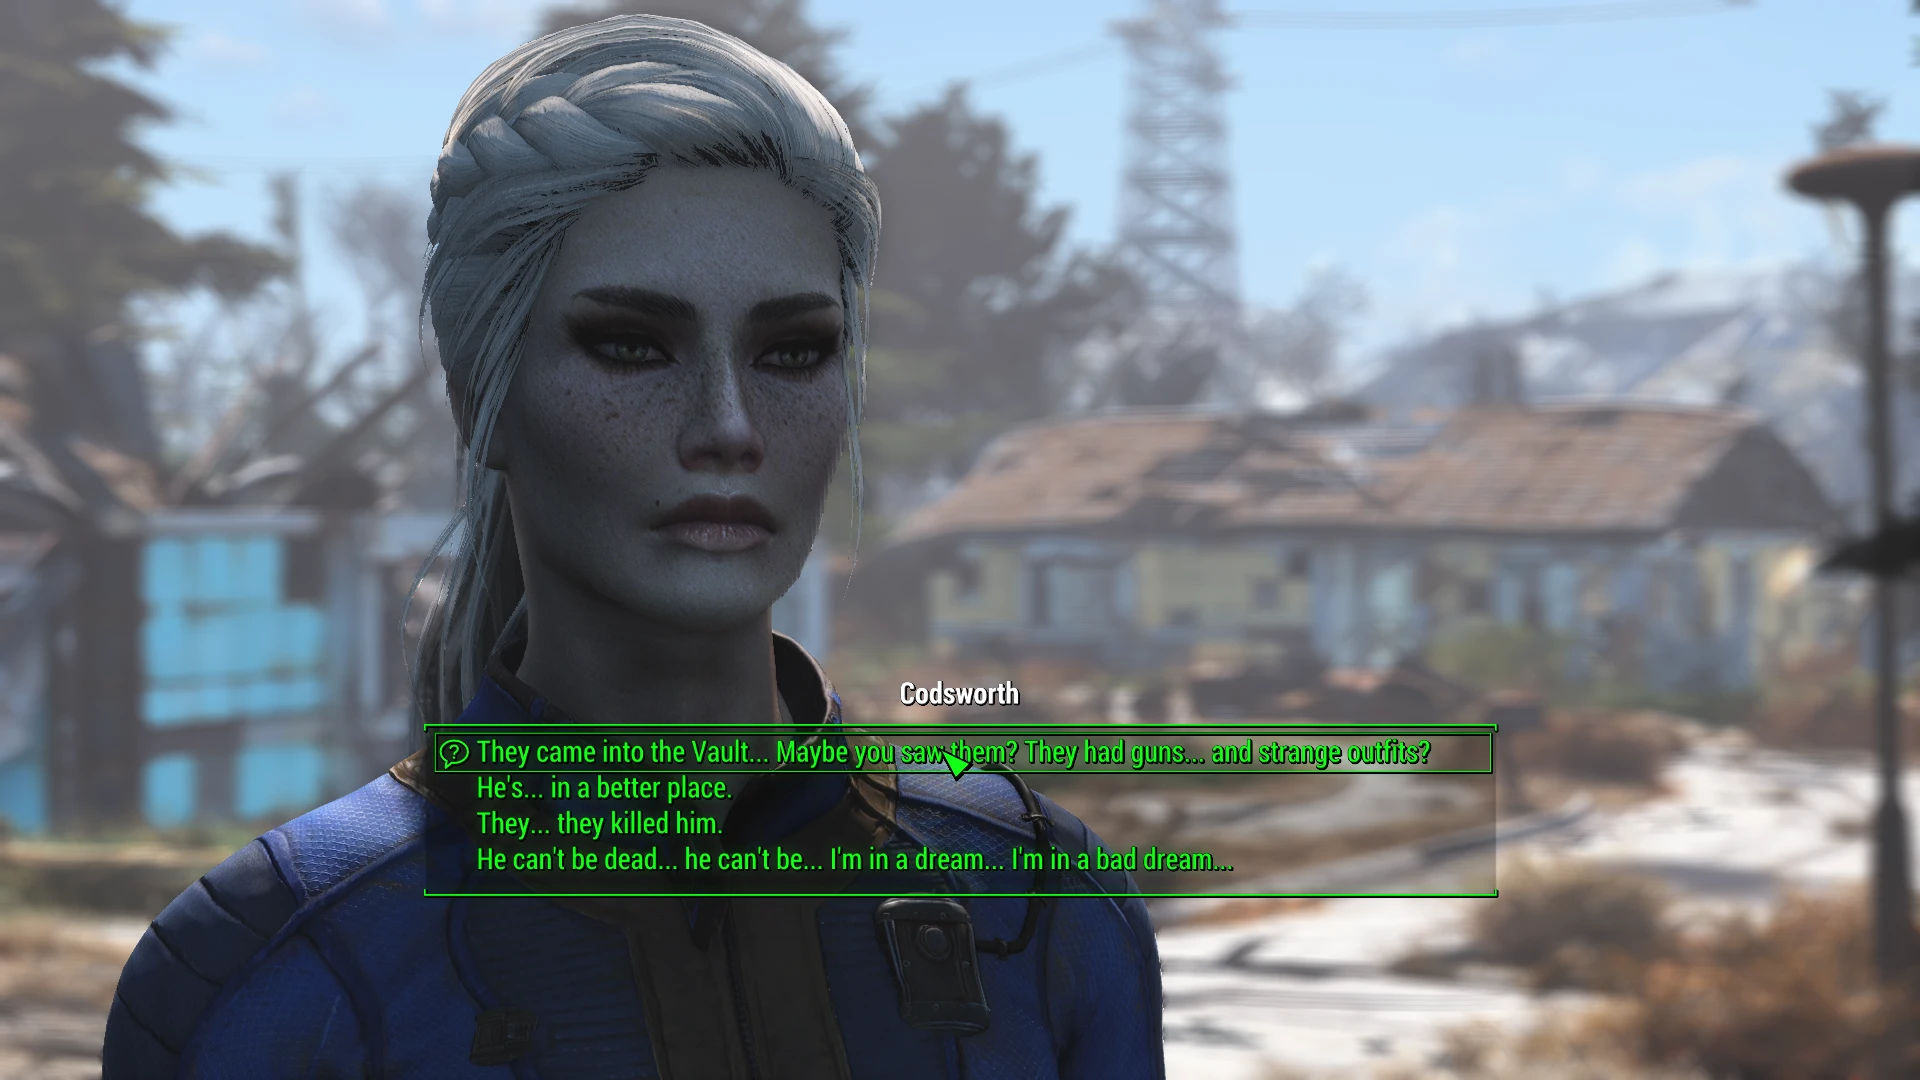 Aesthetic Presets for Player (LooksMenu) at Fallout 4 Nexus - Mods and ...